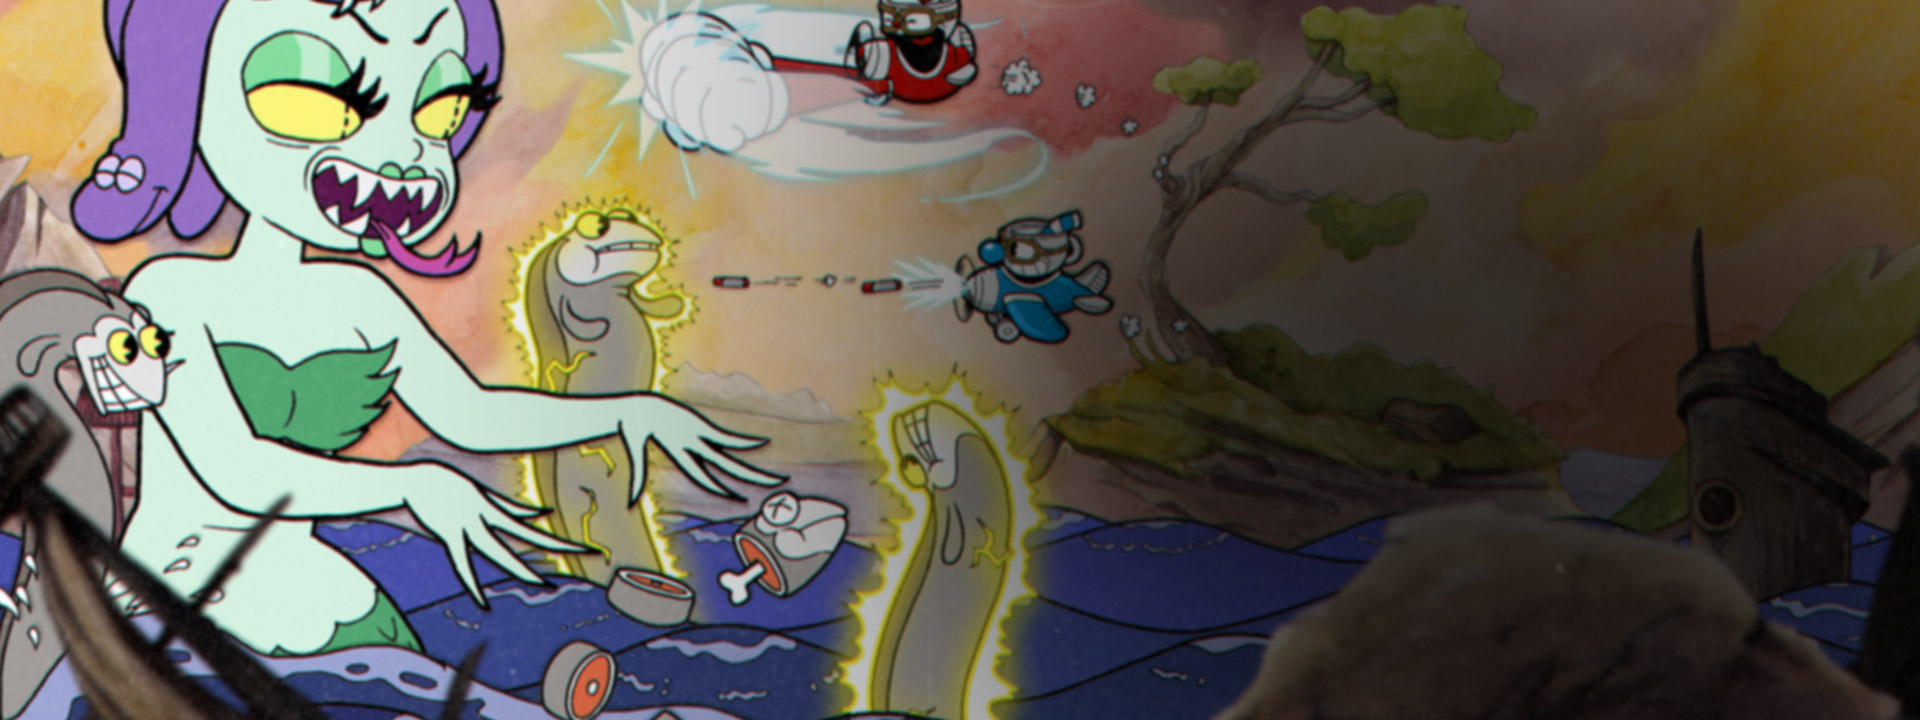 Cuphead and Mugman ride in aeroplanes and fire at the Mermaid Cala Maria attacking them with eels